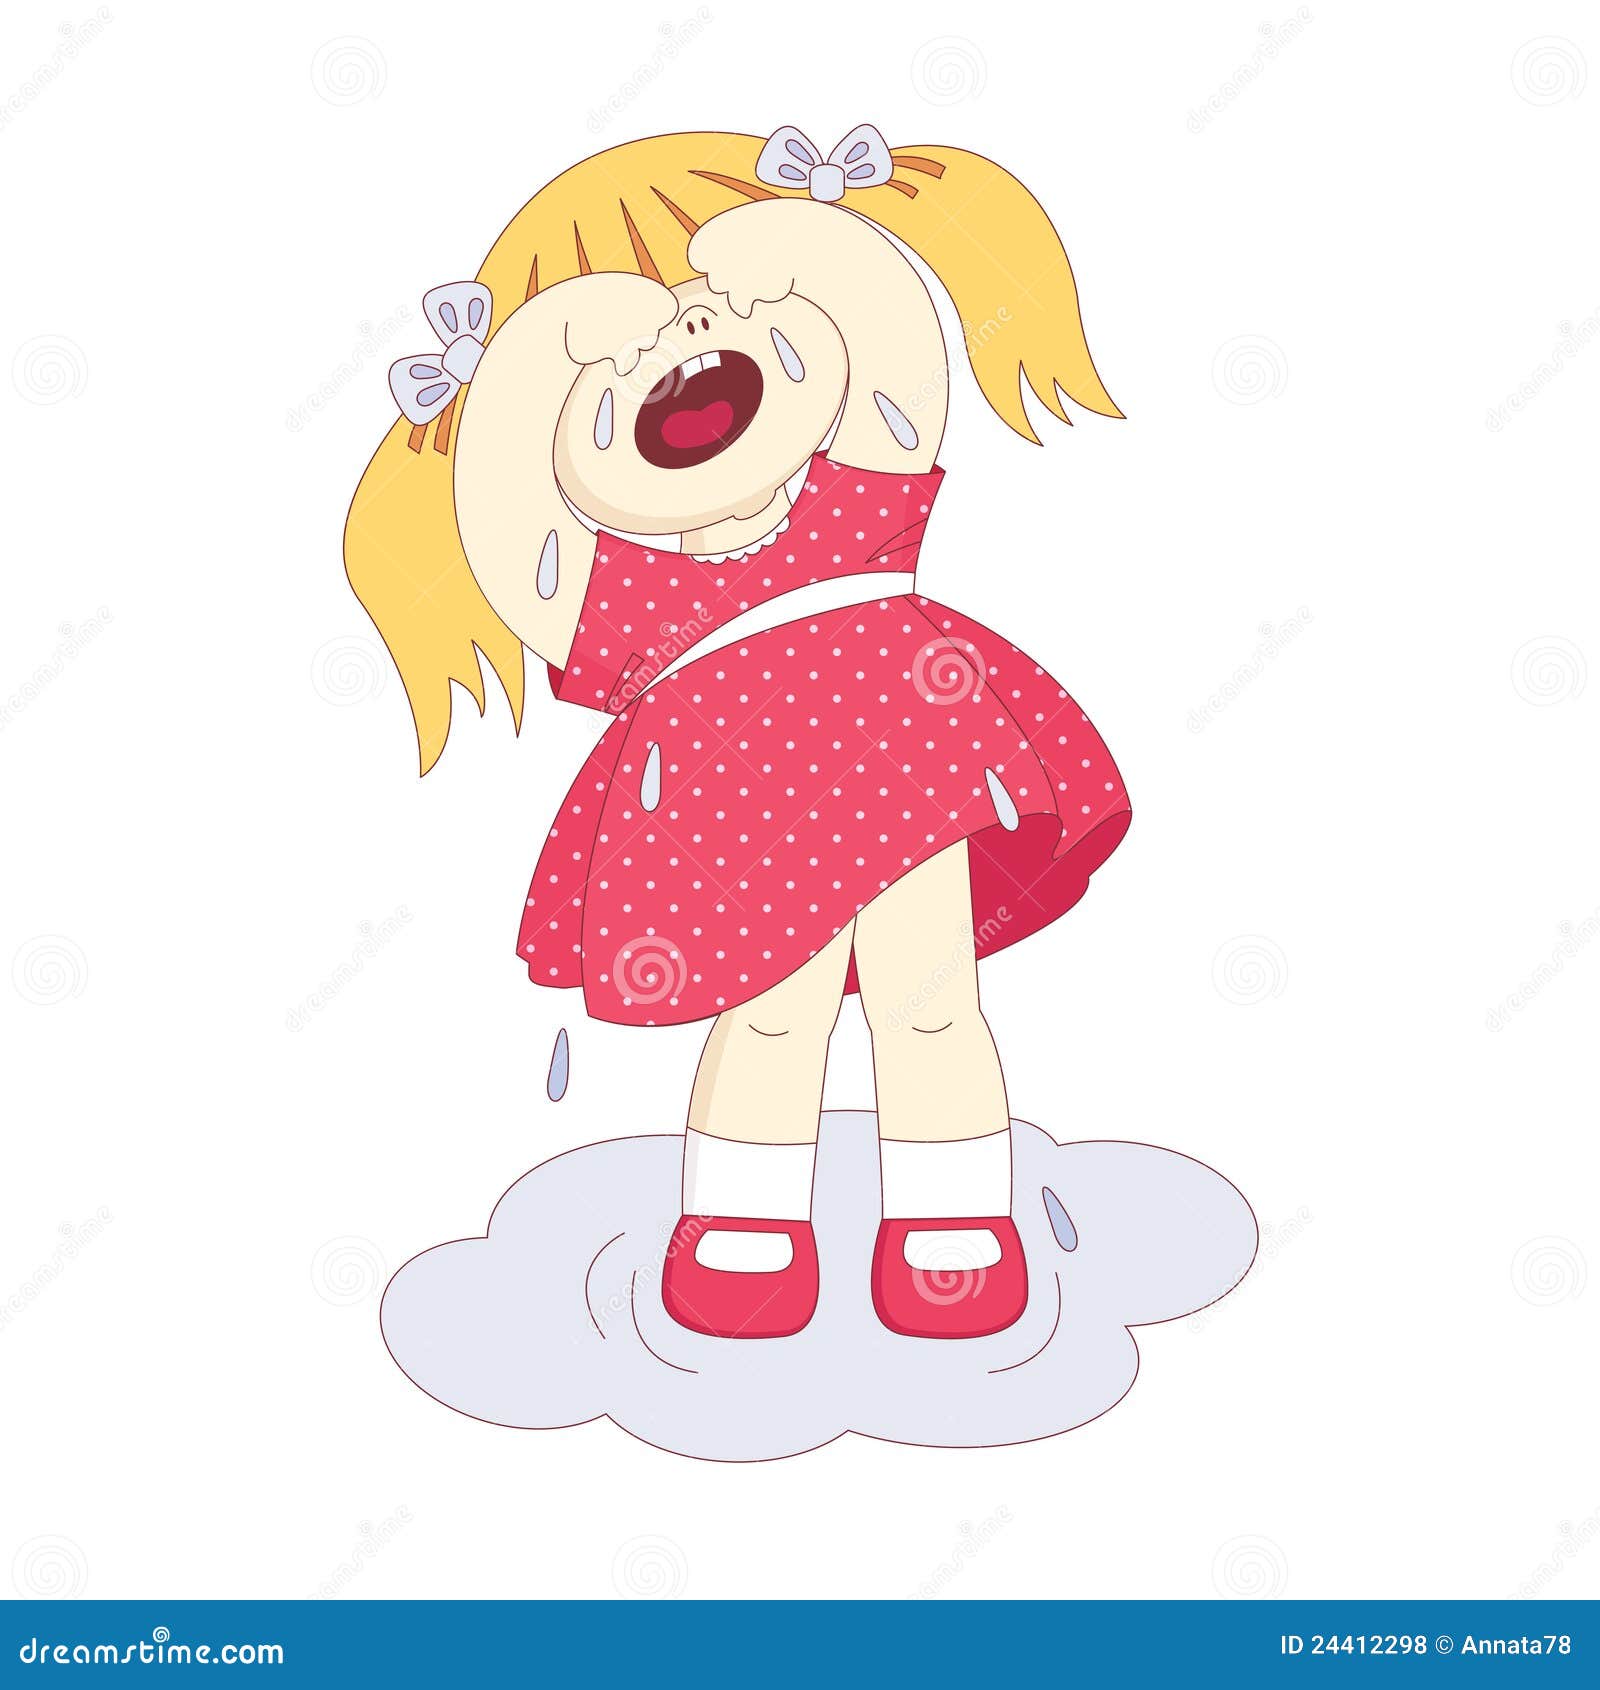 clipart of little girl crying - photo #27